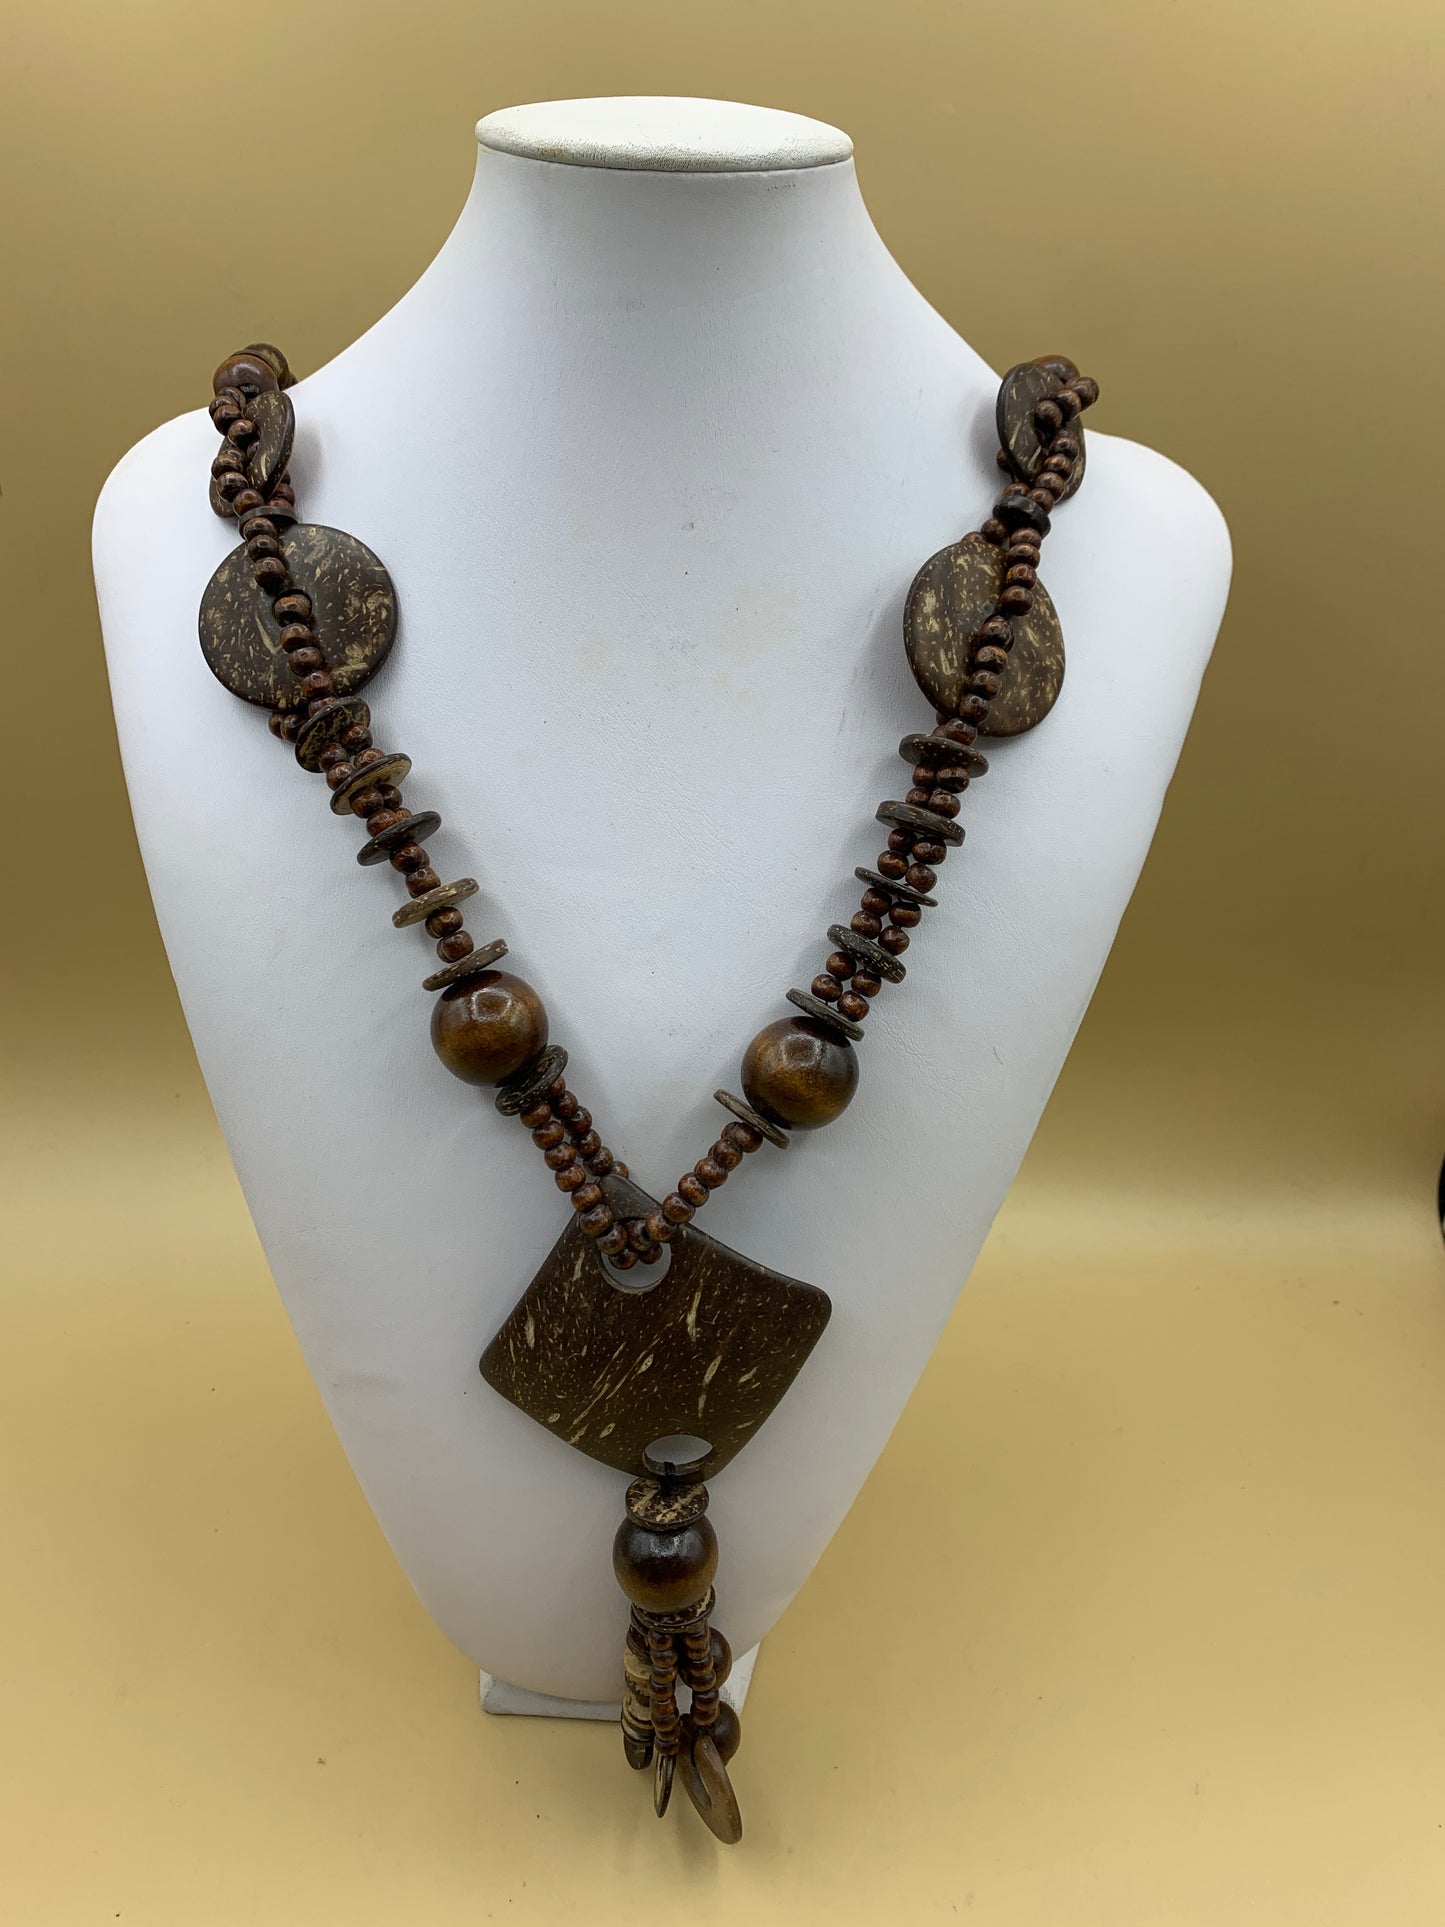 Necklace with rope and coconut pendant